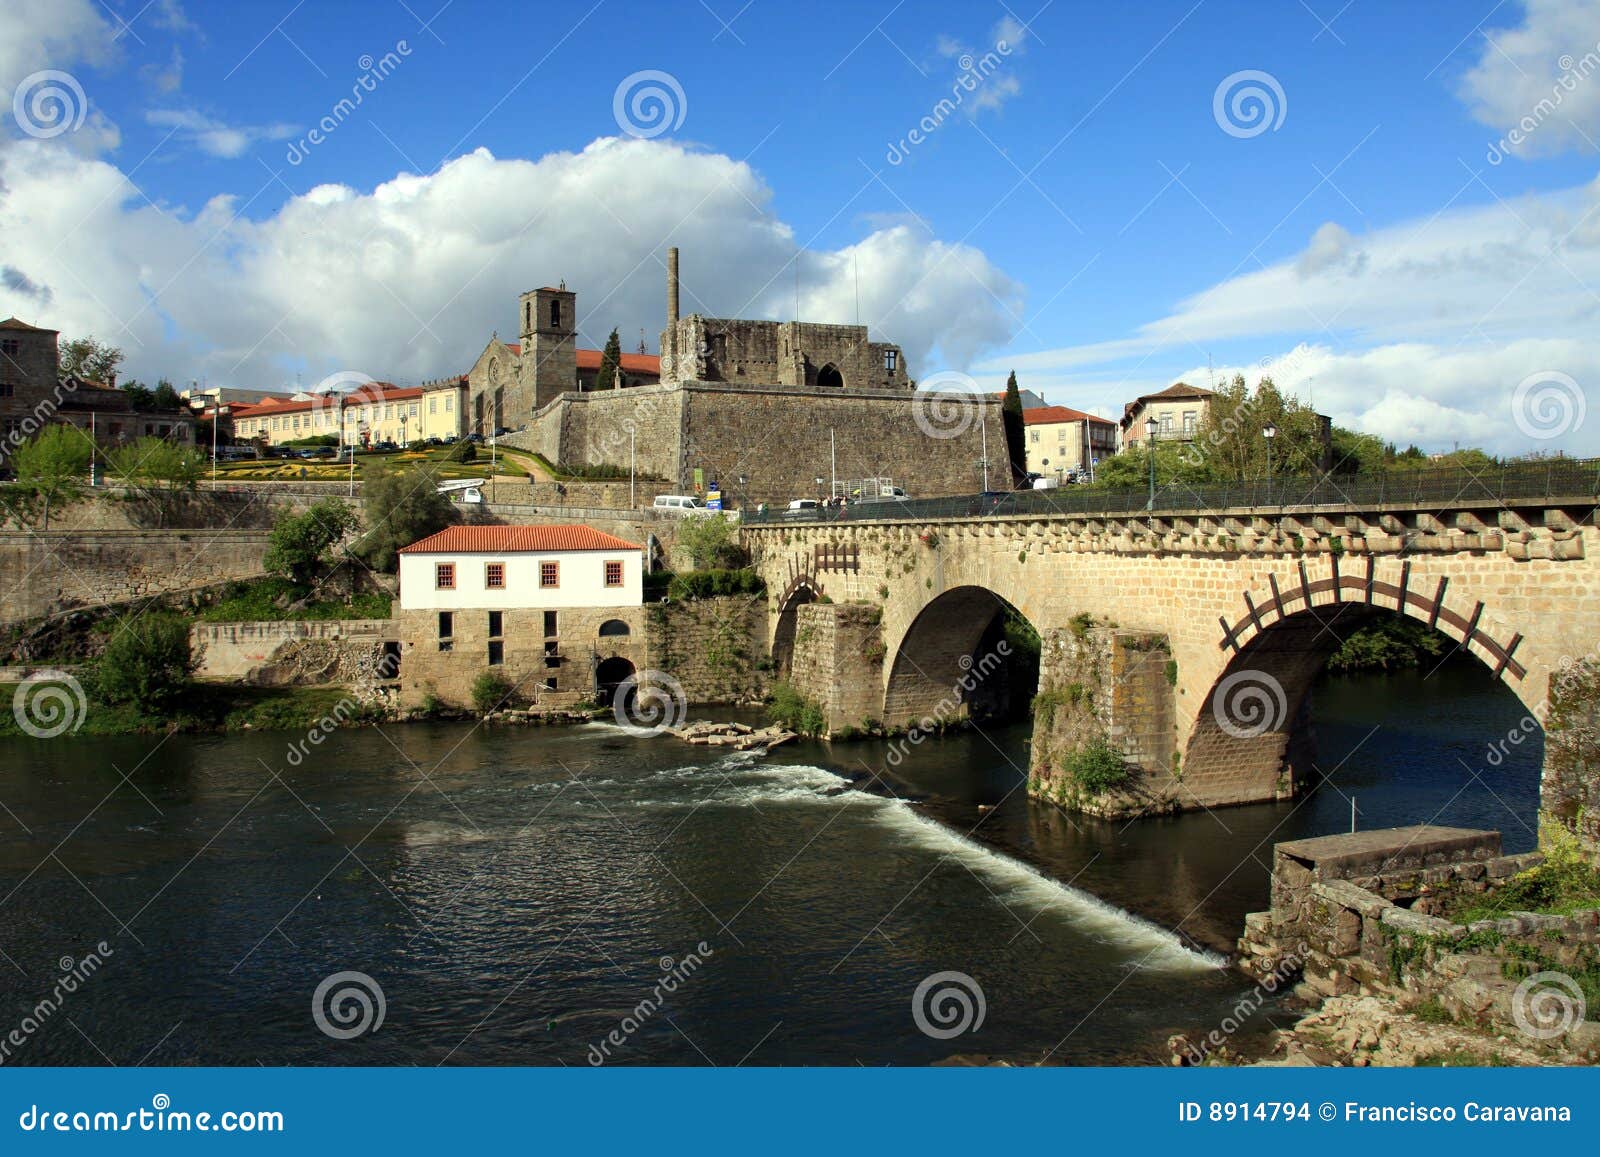 historical part of barcelos city